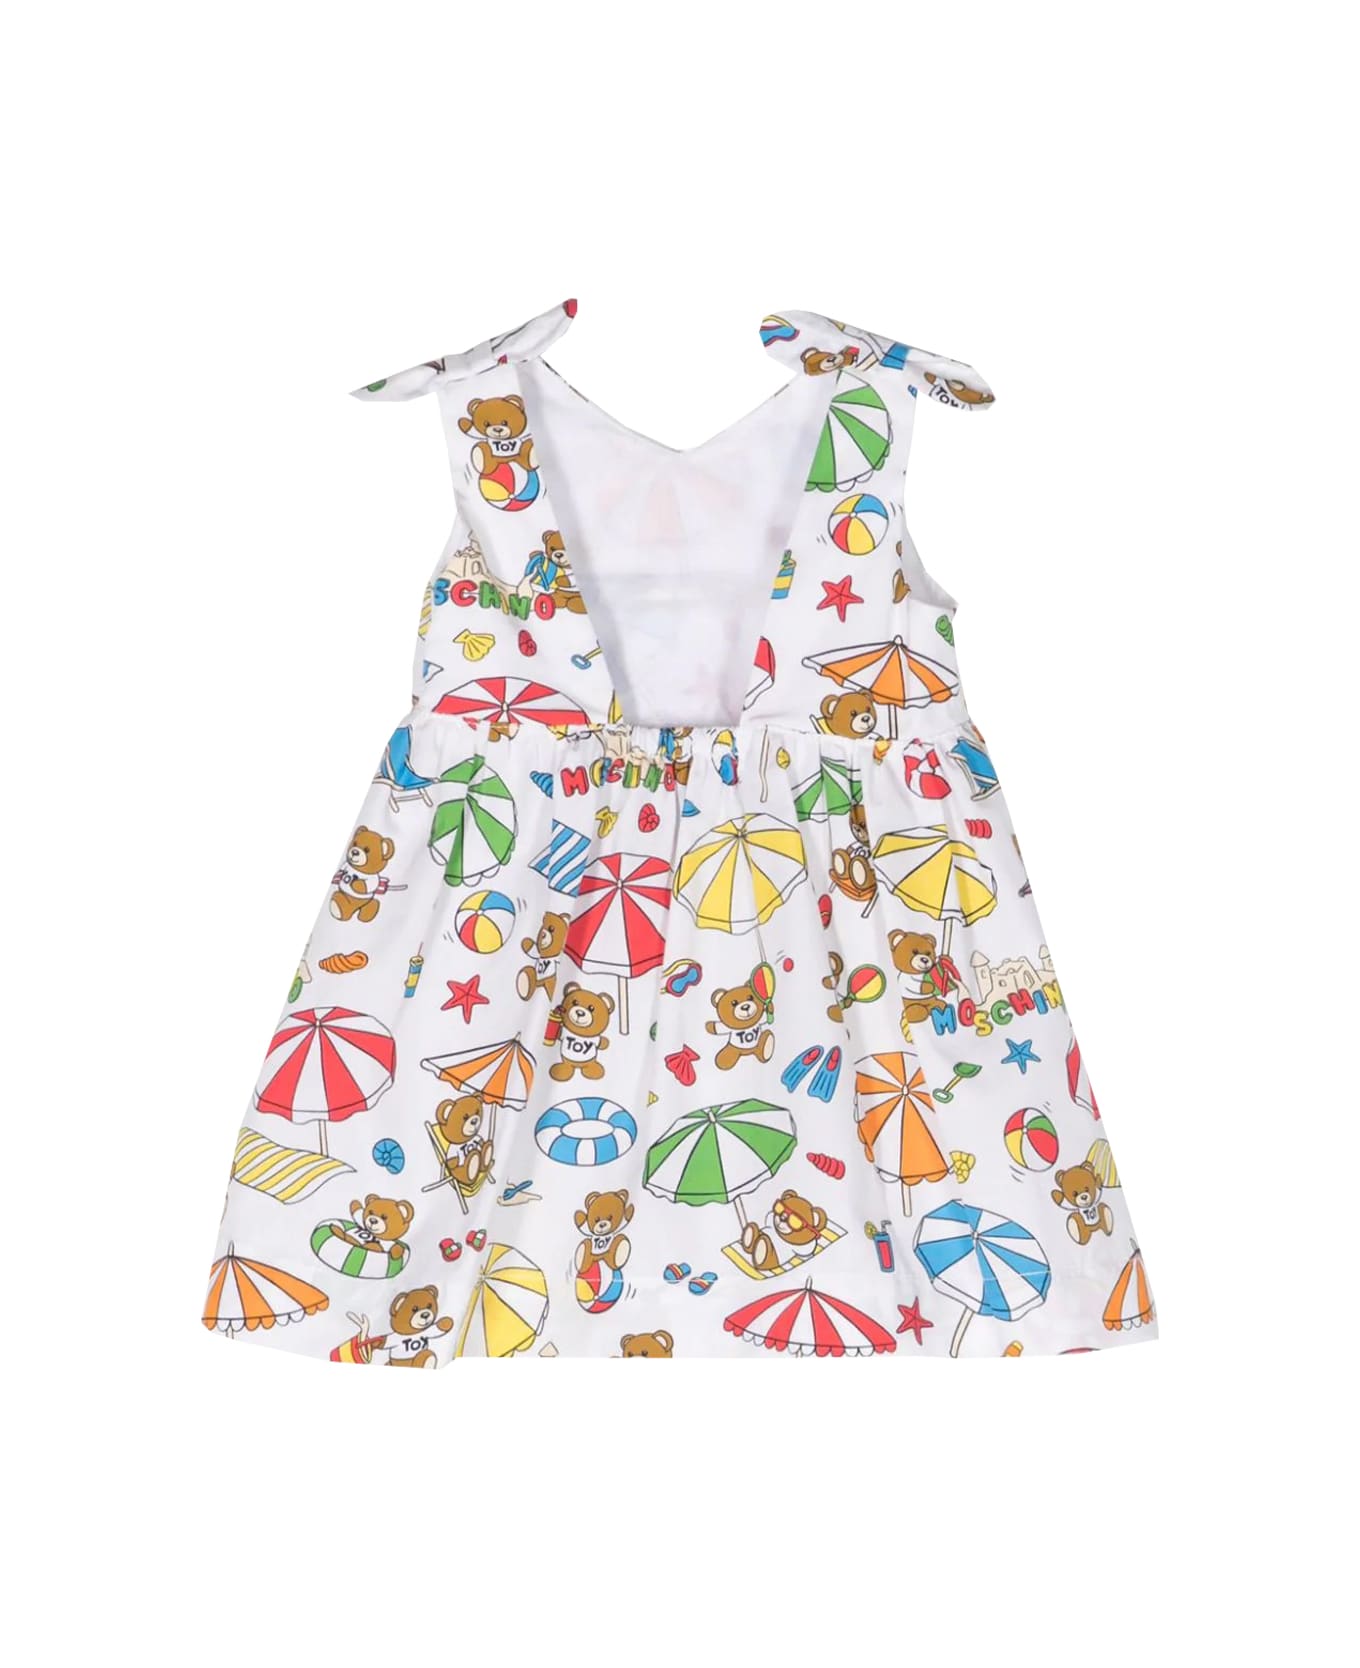 Moschino Dress With Teddy Bear Print - Multicolor